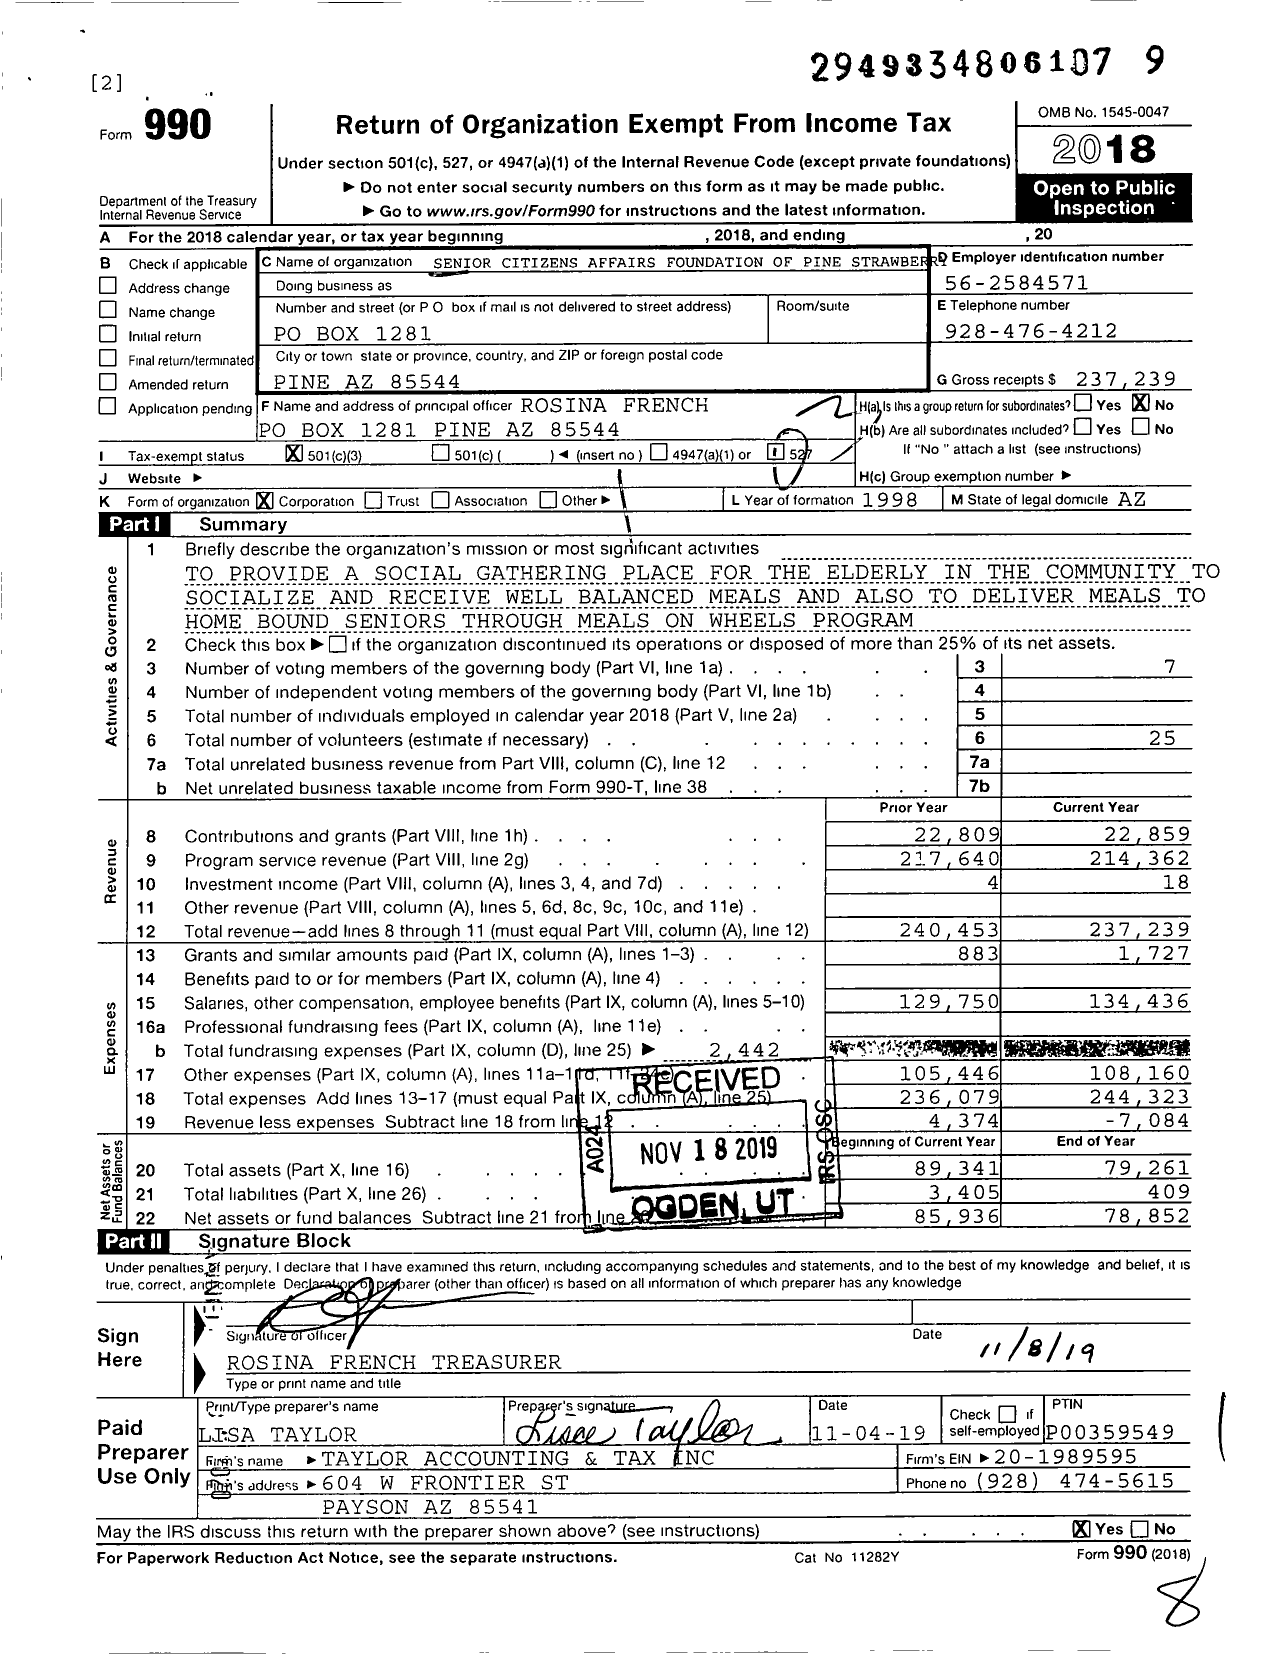 Image of first page of 2018 Form 990 for Senior Citizens Affairs Foundation of Pine Strawberry